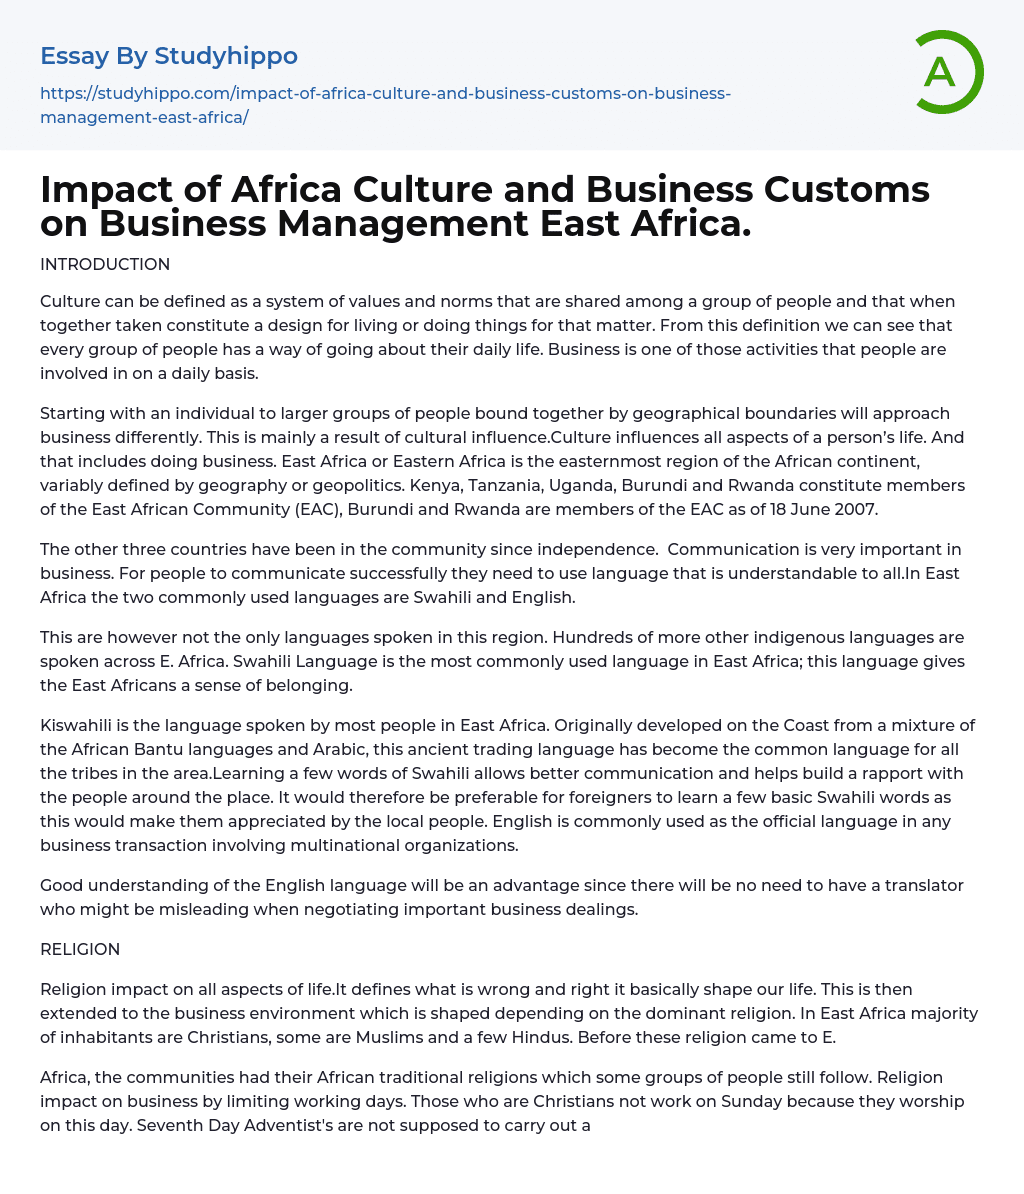 Impact of Africa Culture and Business Customs on Business Management East Africa. Essay Example